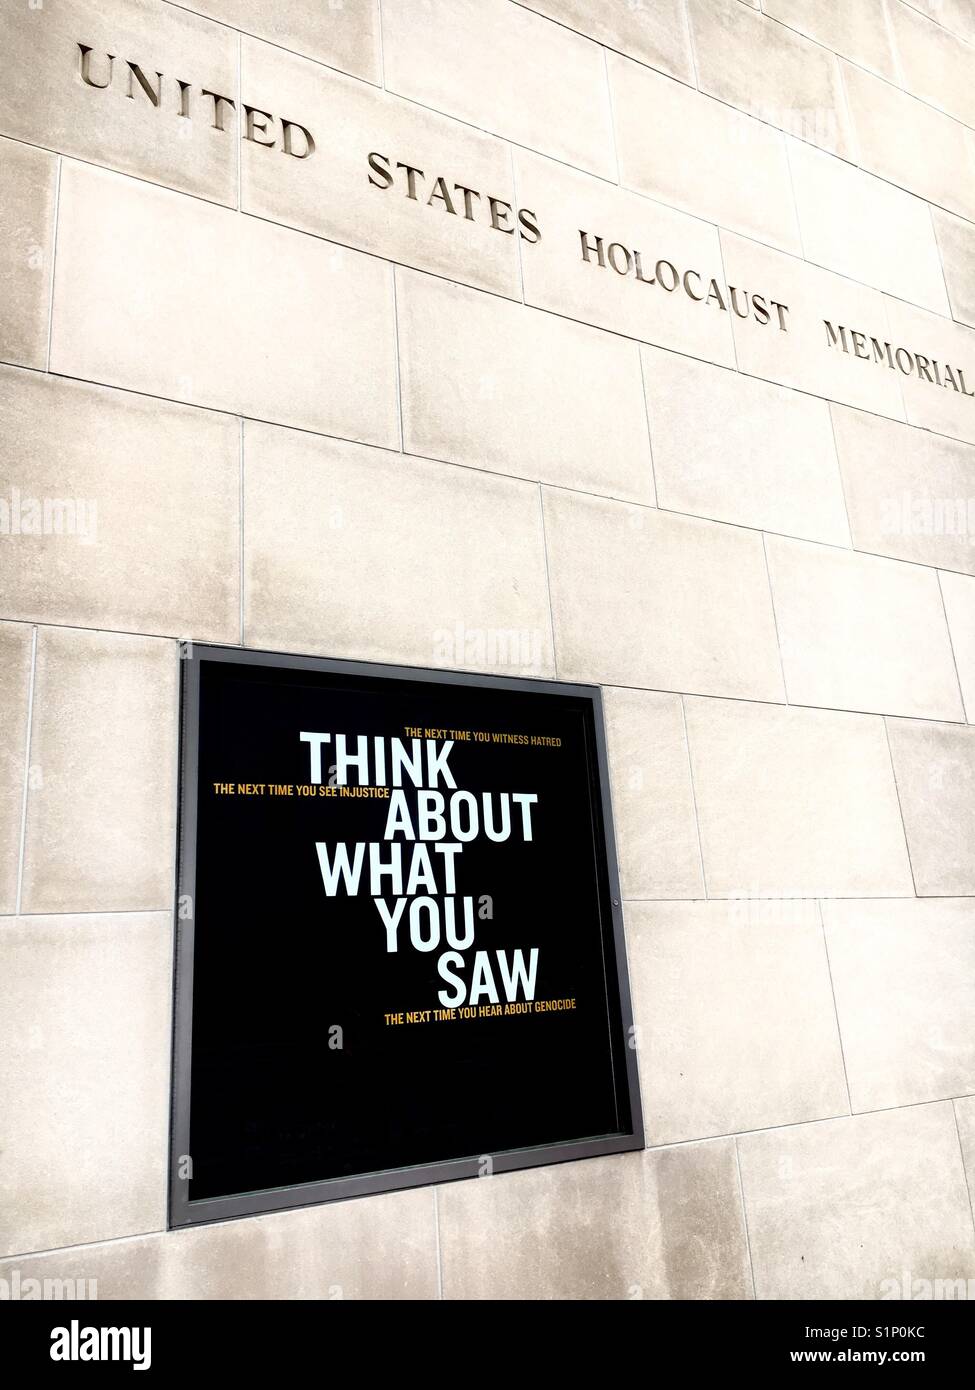 United States Holocaust Memorial Washington, DC. Think about what you saw Stock Photo